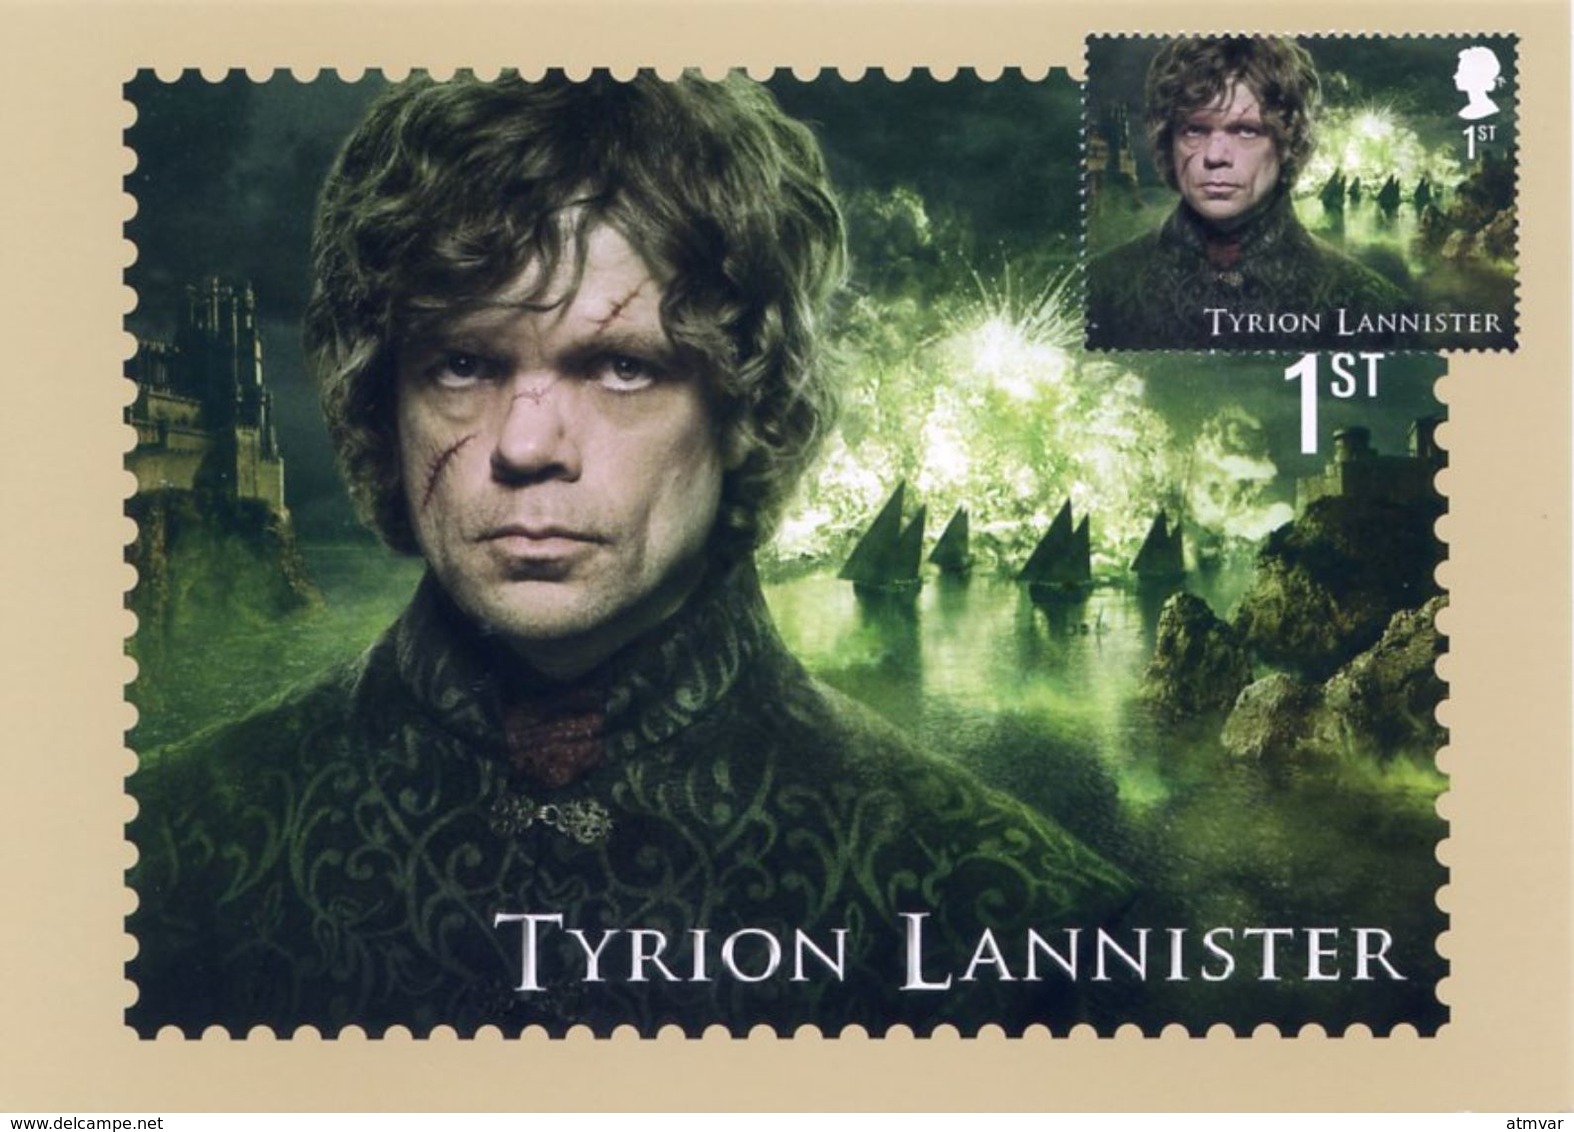 REINO UNIDO / UK (2018) - GAME OF THRONES Full Set Of Postcards + Stamps + Post&Go ATMs (see 32 Scans) / Juego De Tronos - 2011-2020 Decimal Issues